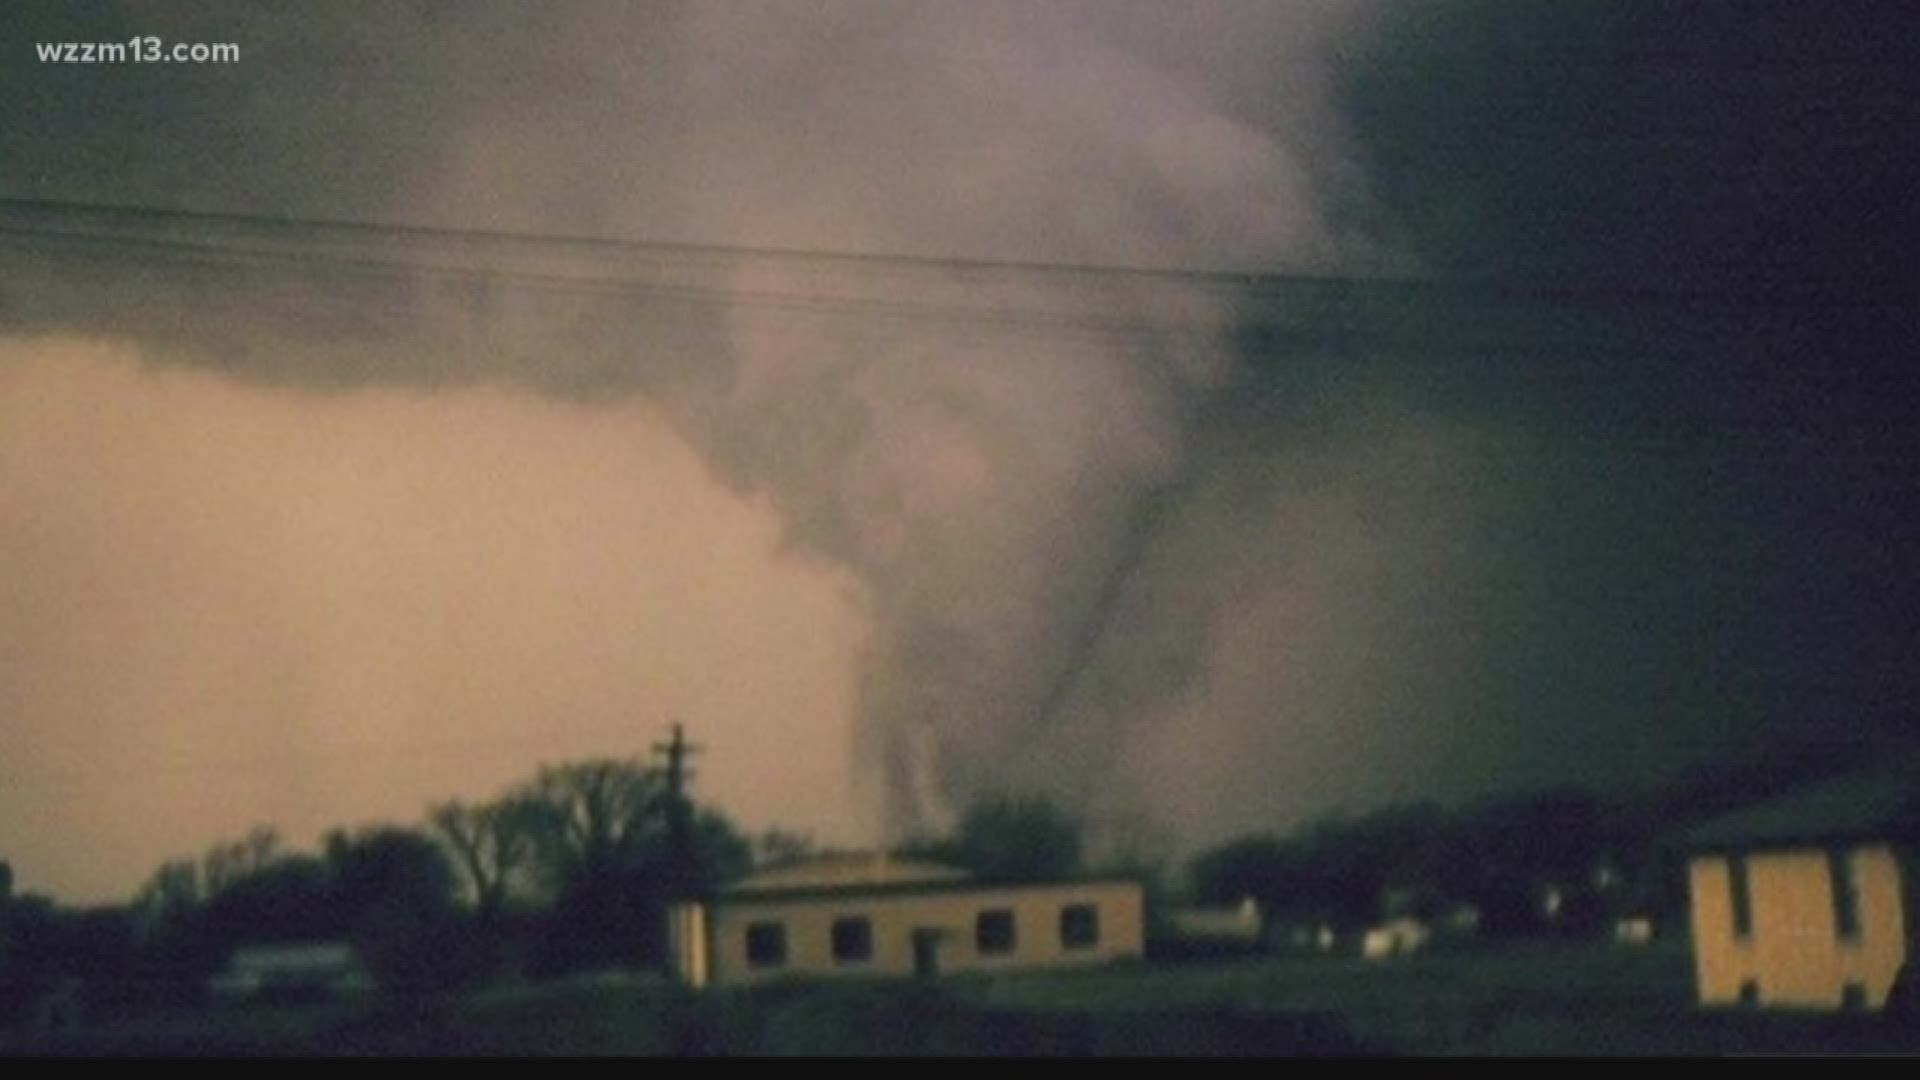 Today marks the 54th anniversary of the Palm Sunday tornado outbreak, one of the worst in Michigan's history.
April 11, 1965 is remembered as one of the worst tornado outbreaks in Michigan history. 53 people were killed and hundreds hurt when a dozen tornadoes touched down across the state, including Kent County.
53 people were killed and hundreds hurt when a dozen tornadoes touched down across the state, including Kent County.